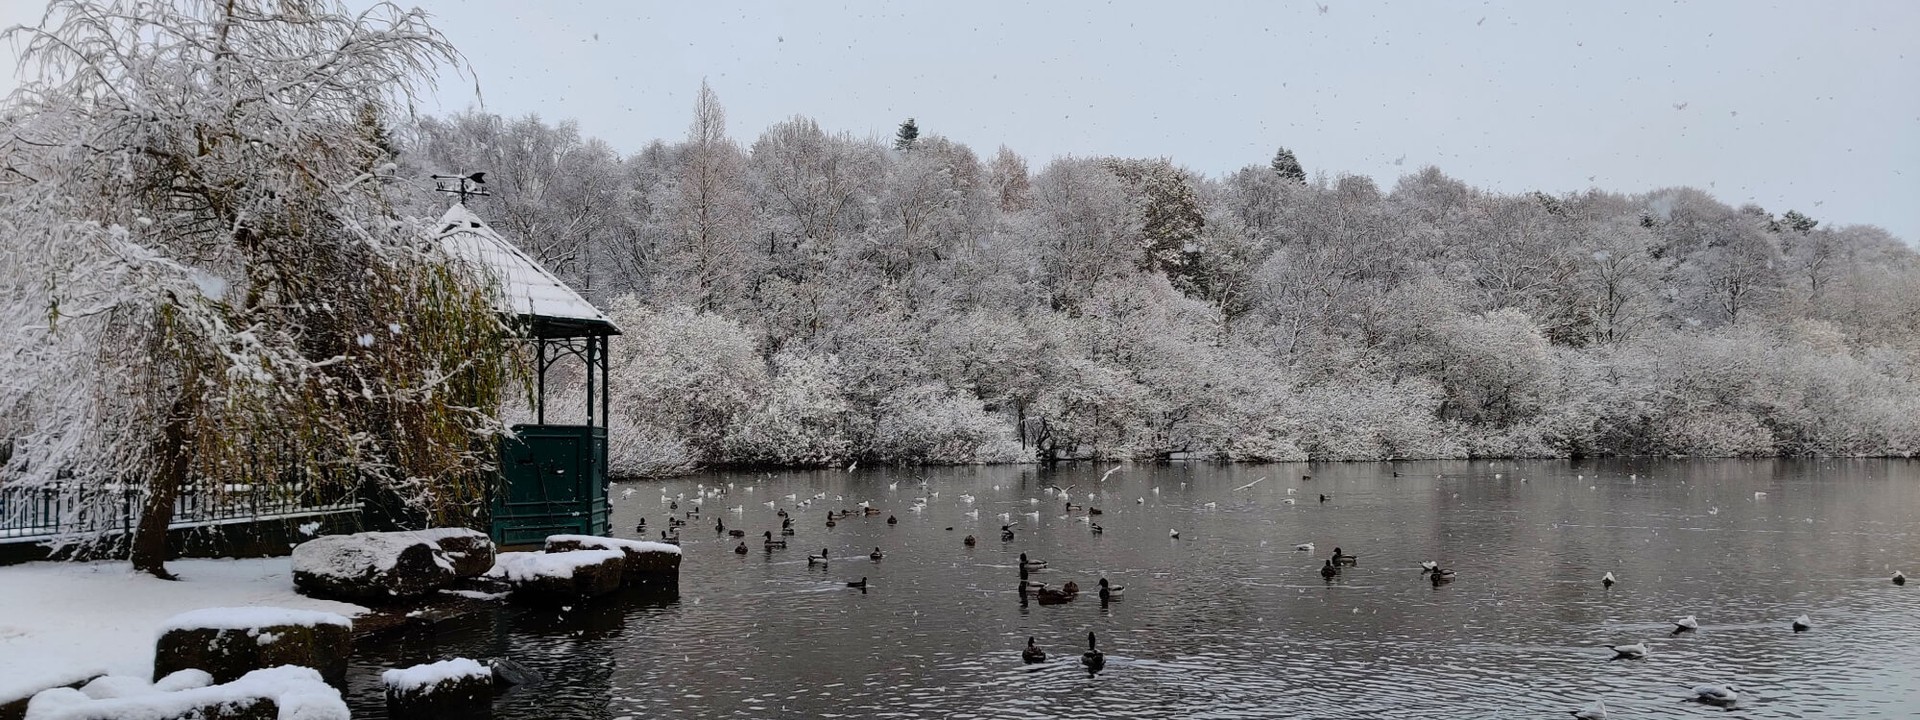 Golden Acre Park lake in the snow with ducks